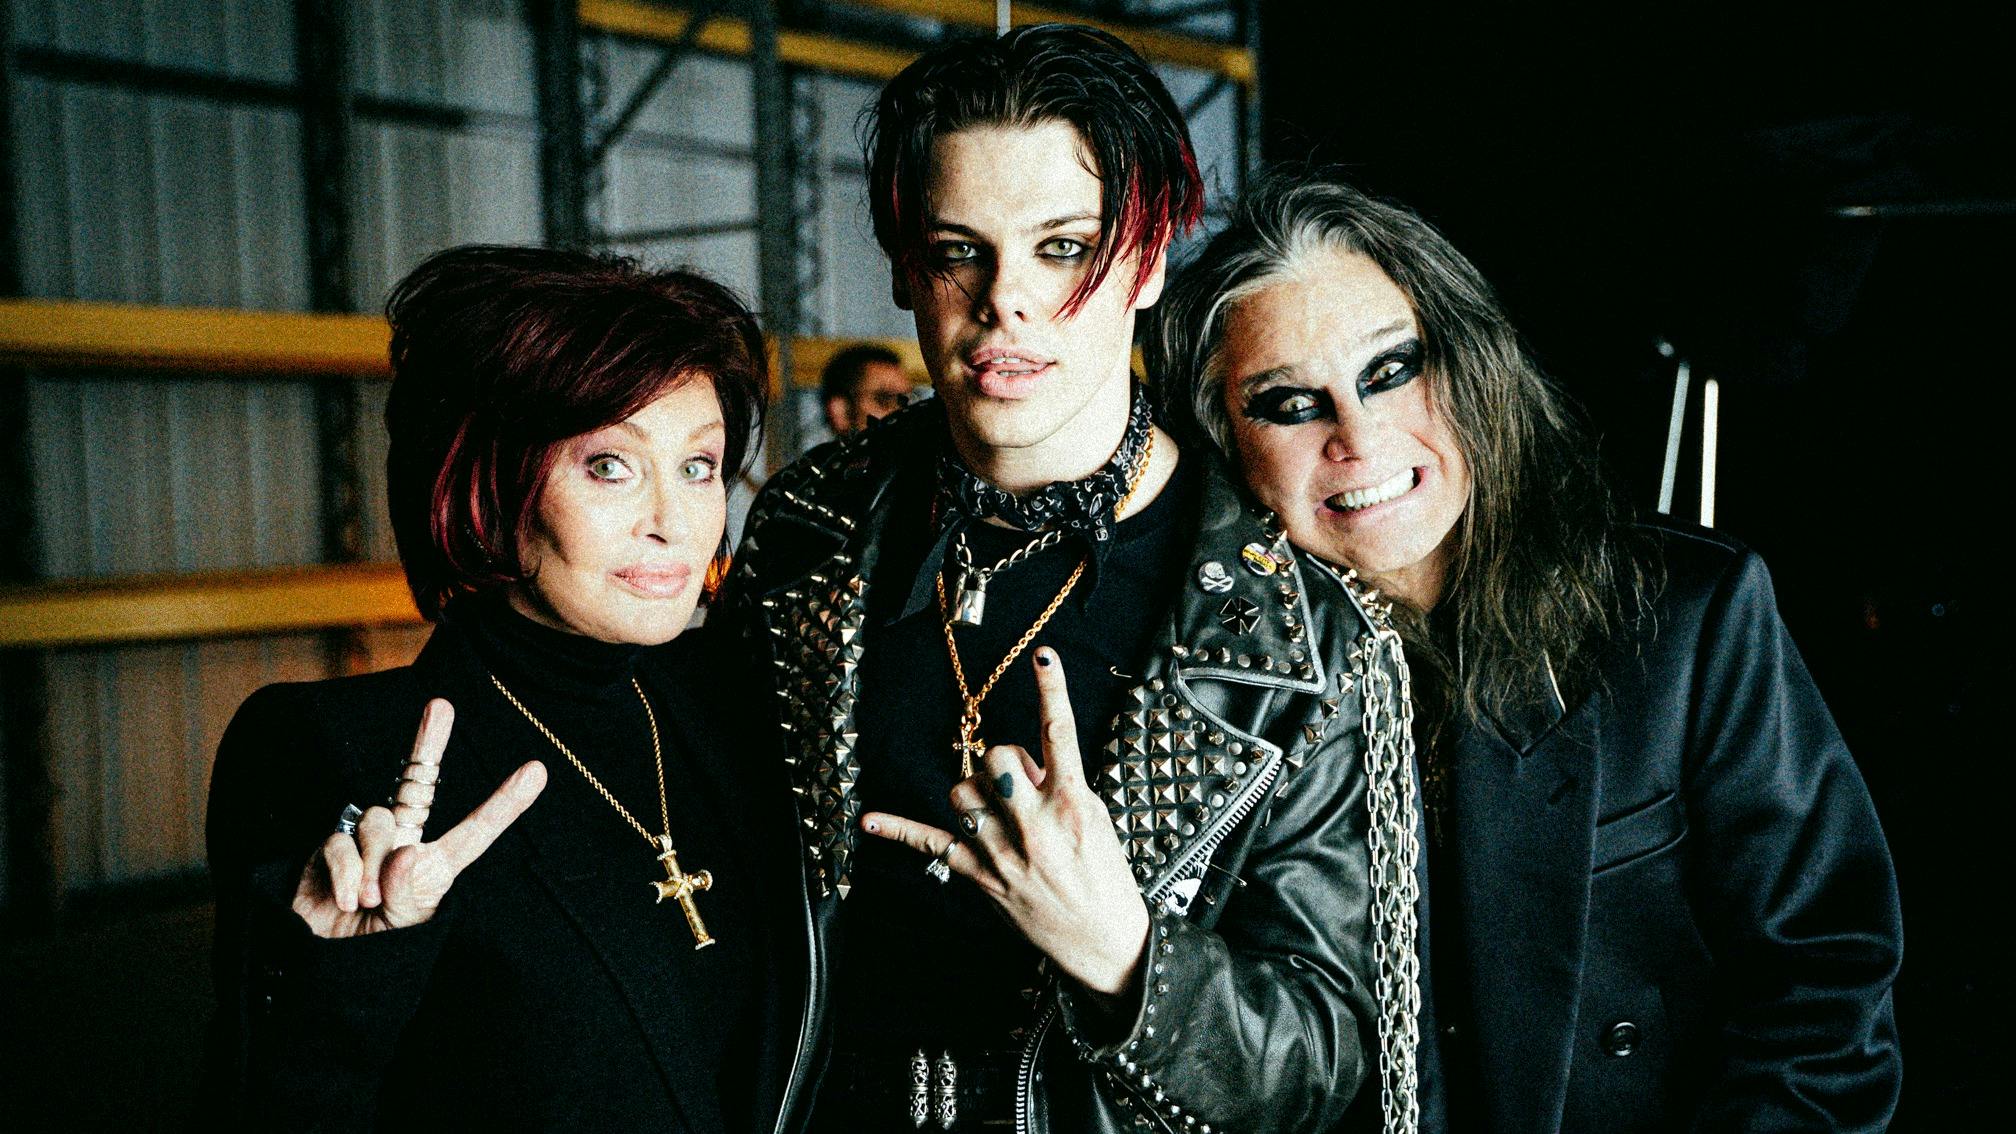 YUNGBLUD releases new video for The Funeral featuring Ozzy and Sharon Osbourne